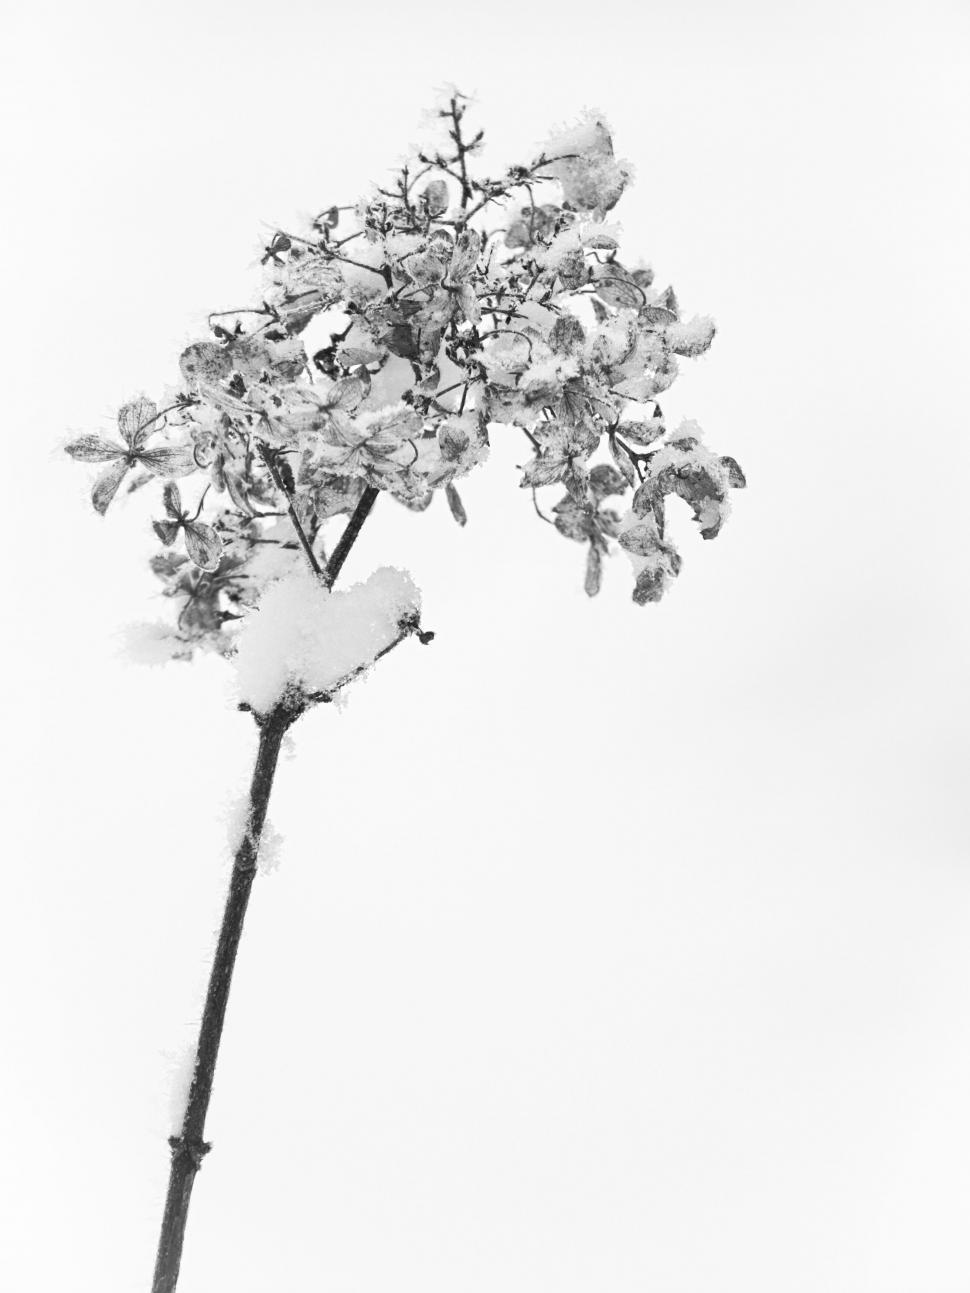 Free Image of Delicate snow-covered plant in winter 